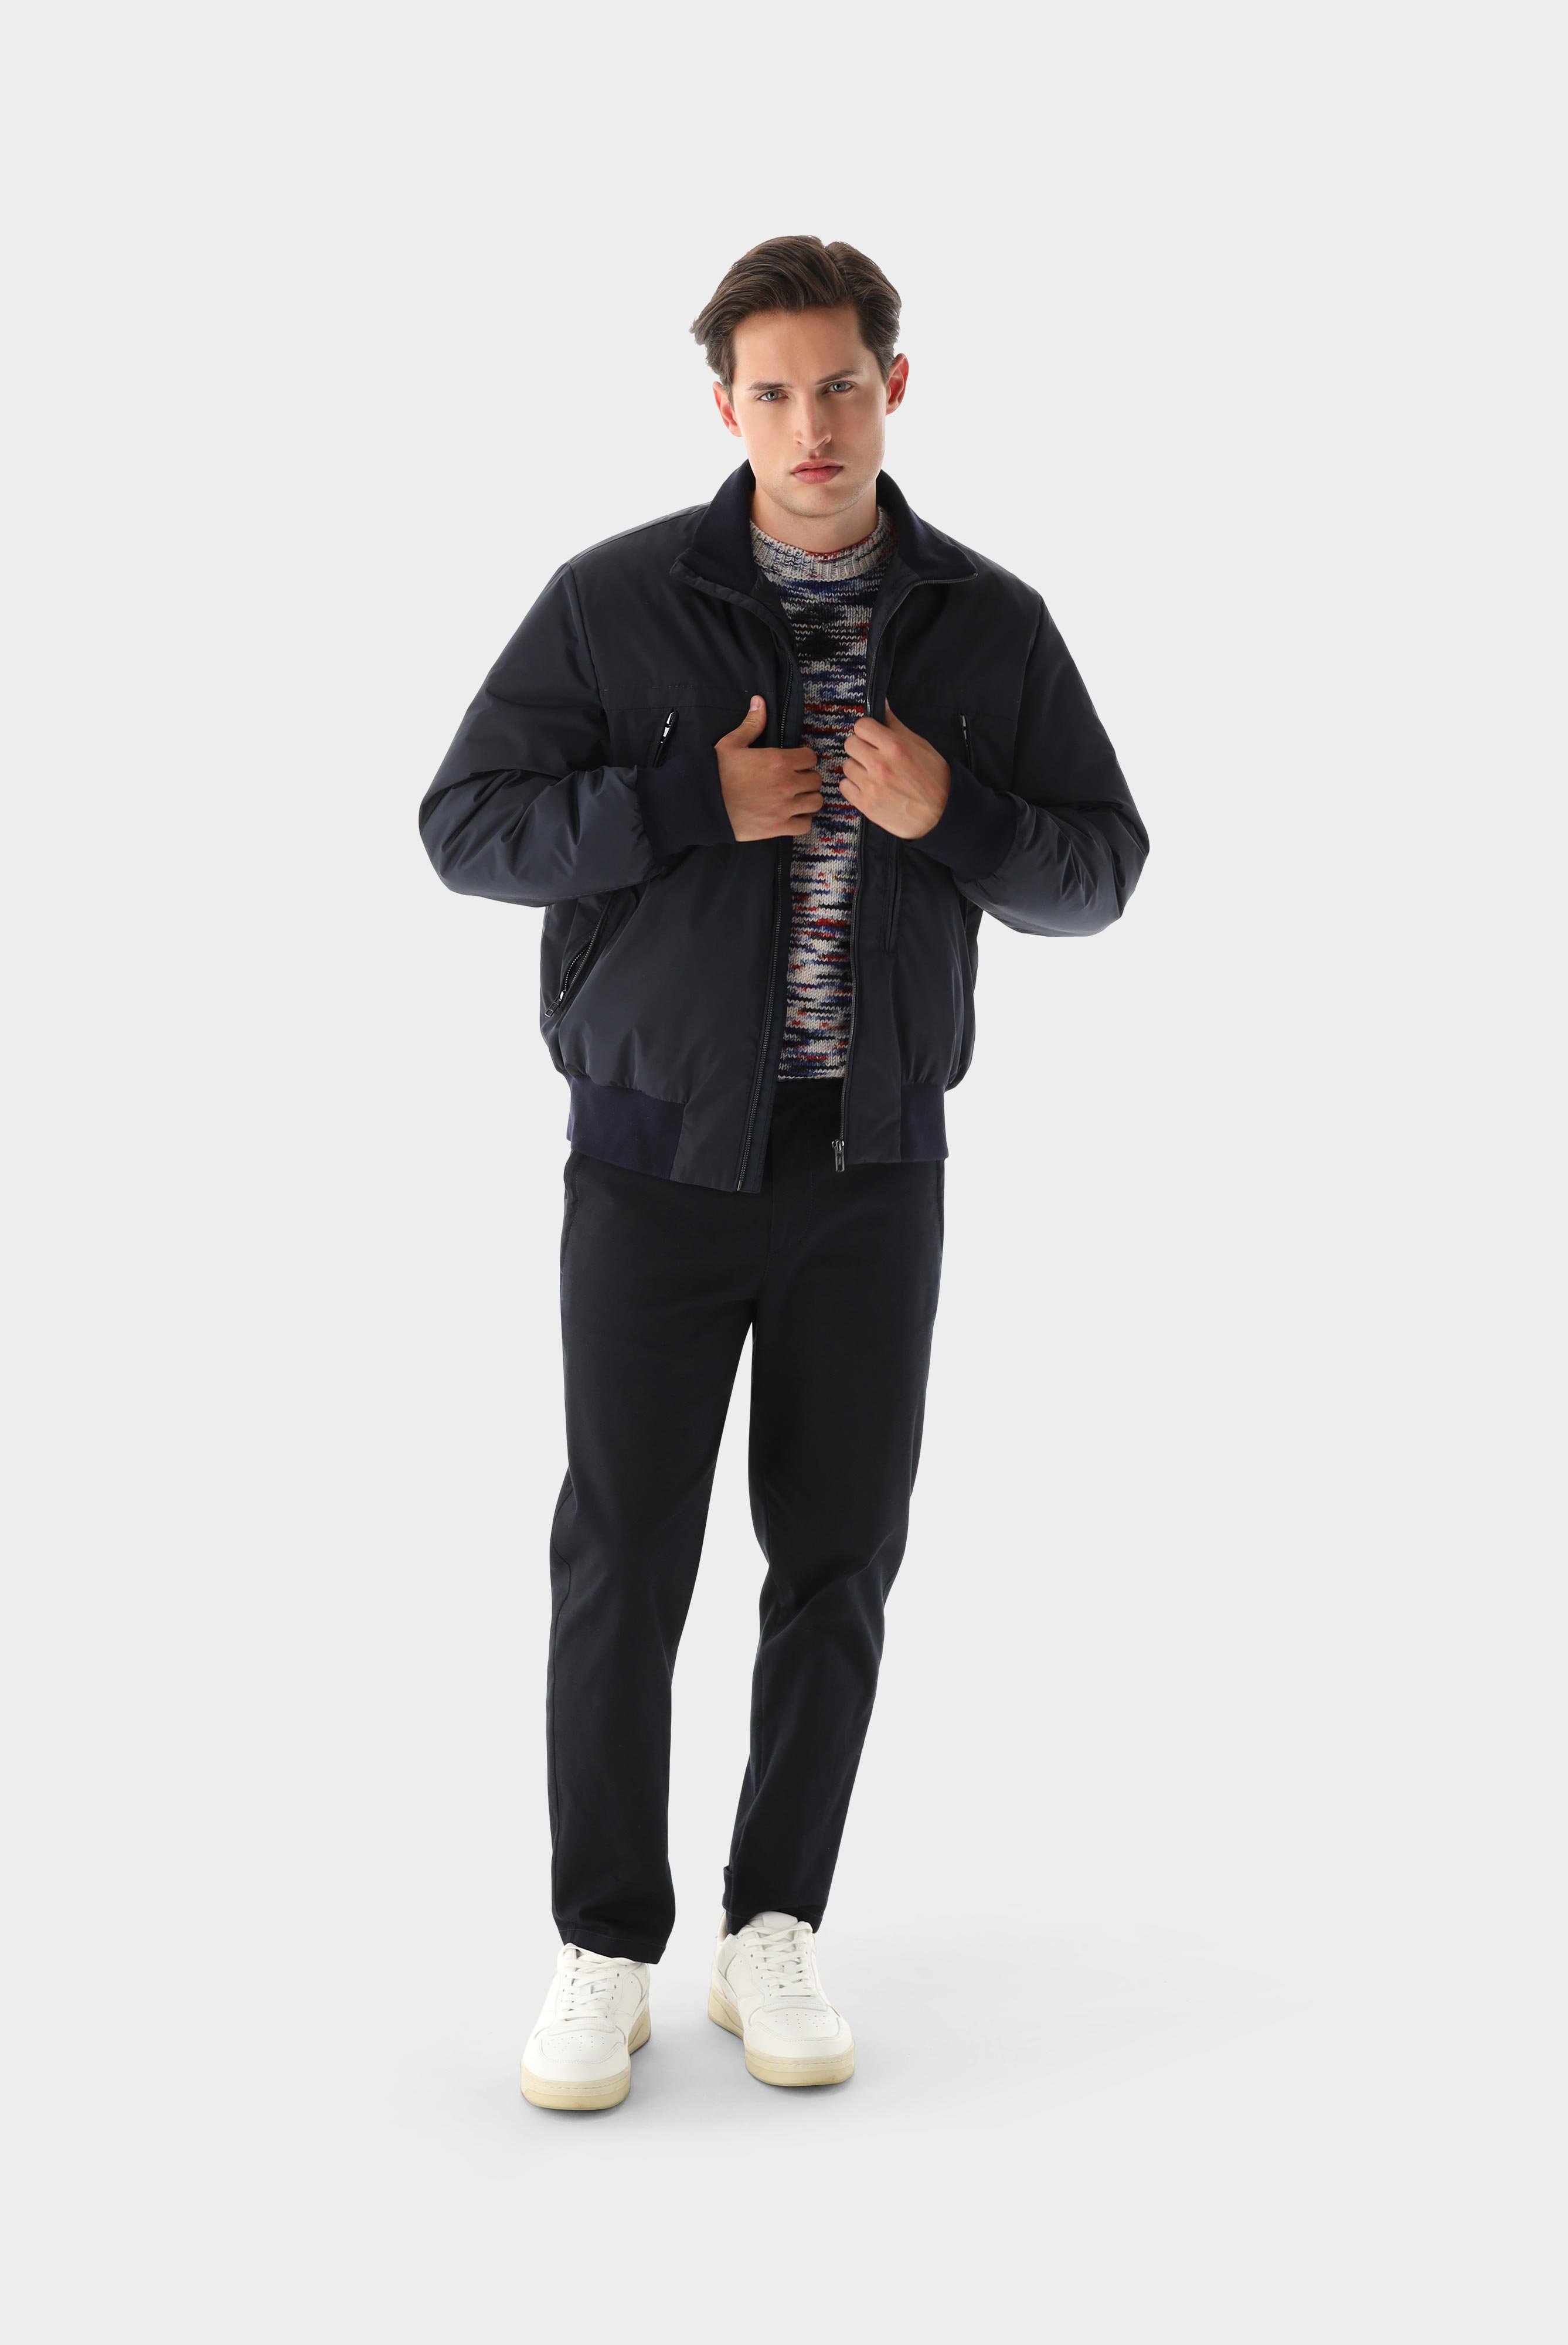 Sports Blouson with Multifunctional Pockets